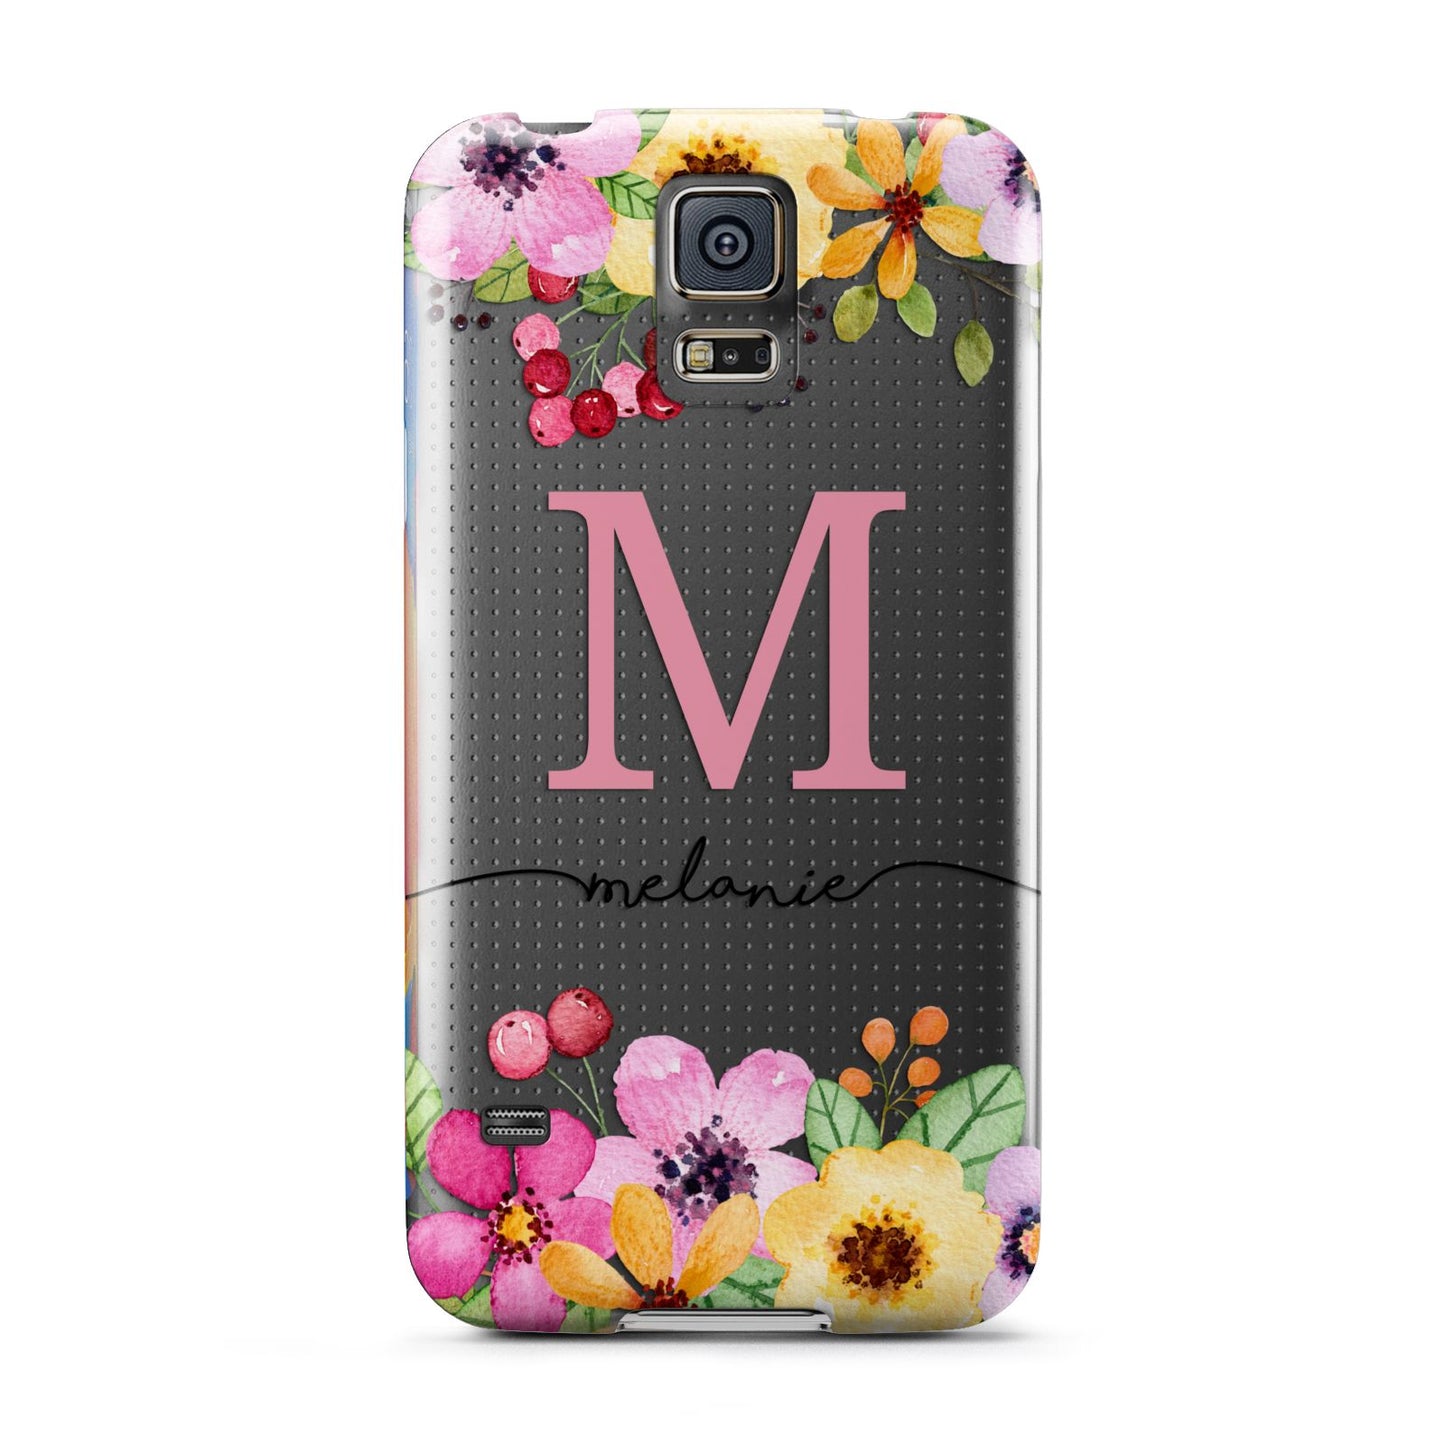 Personalised Summer Flowers Samsung Galaxy S5 Case